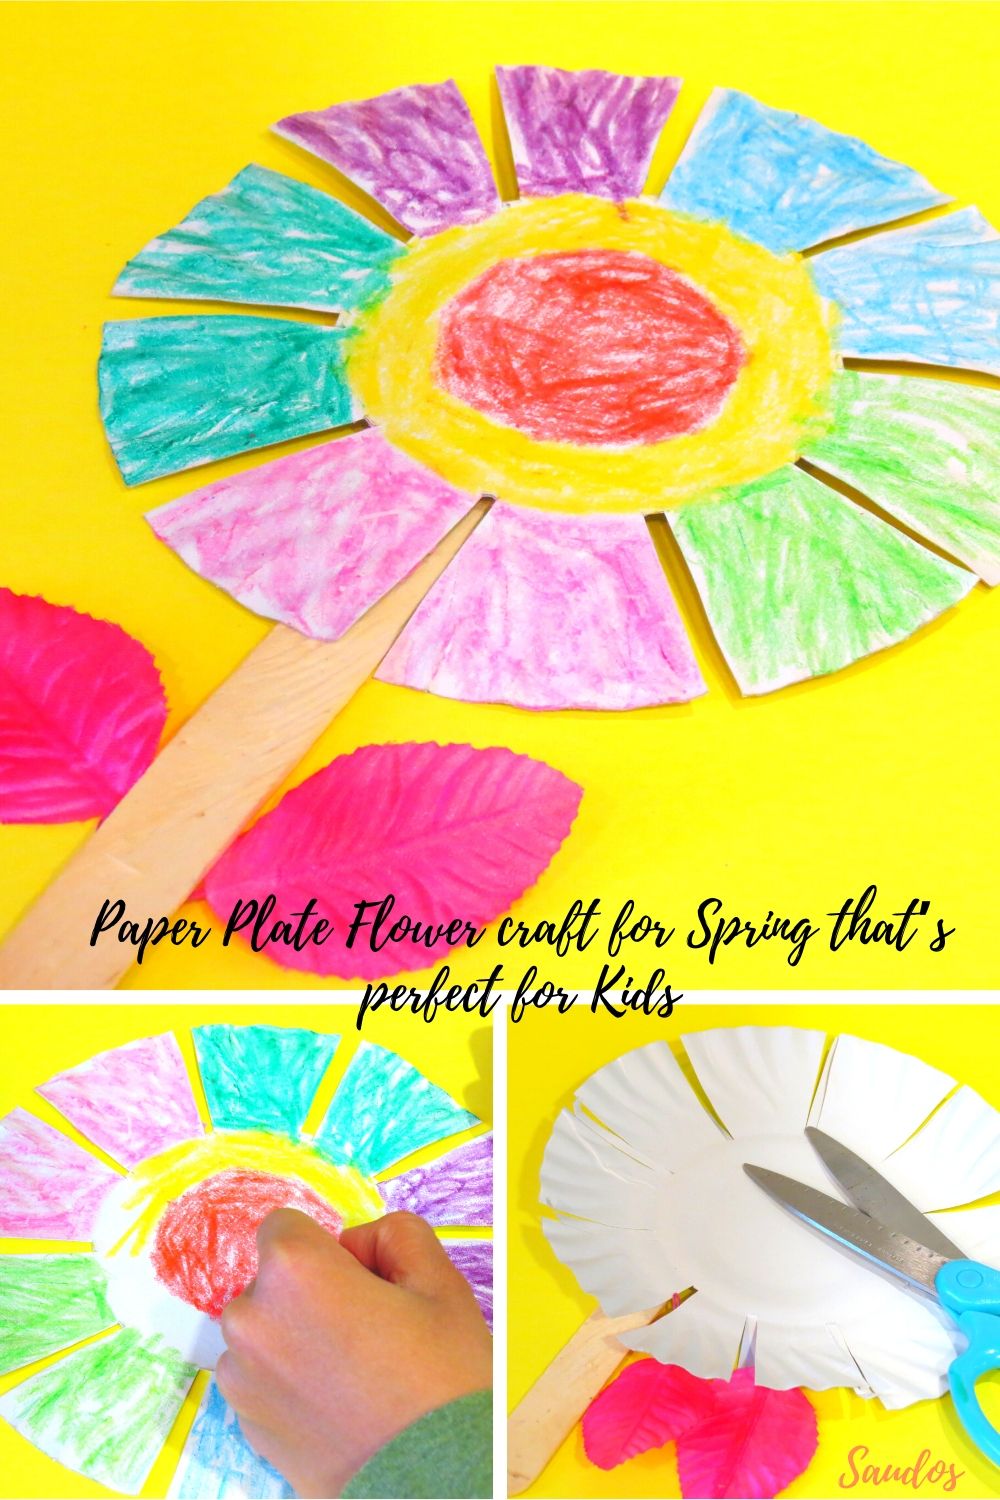 Excellent Spring Craft for Pre-schoolers